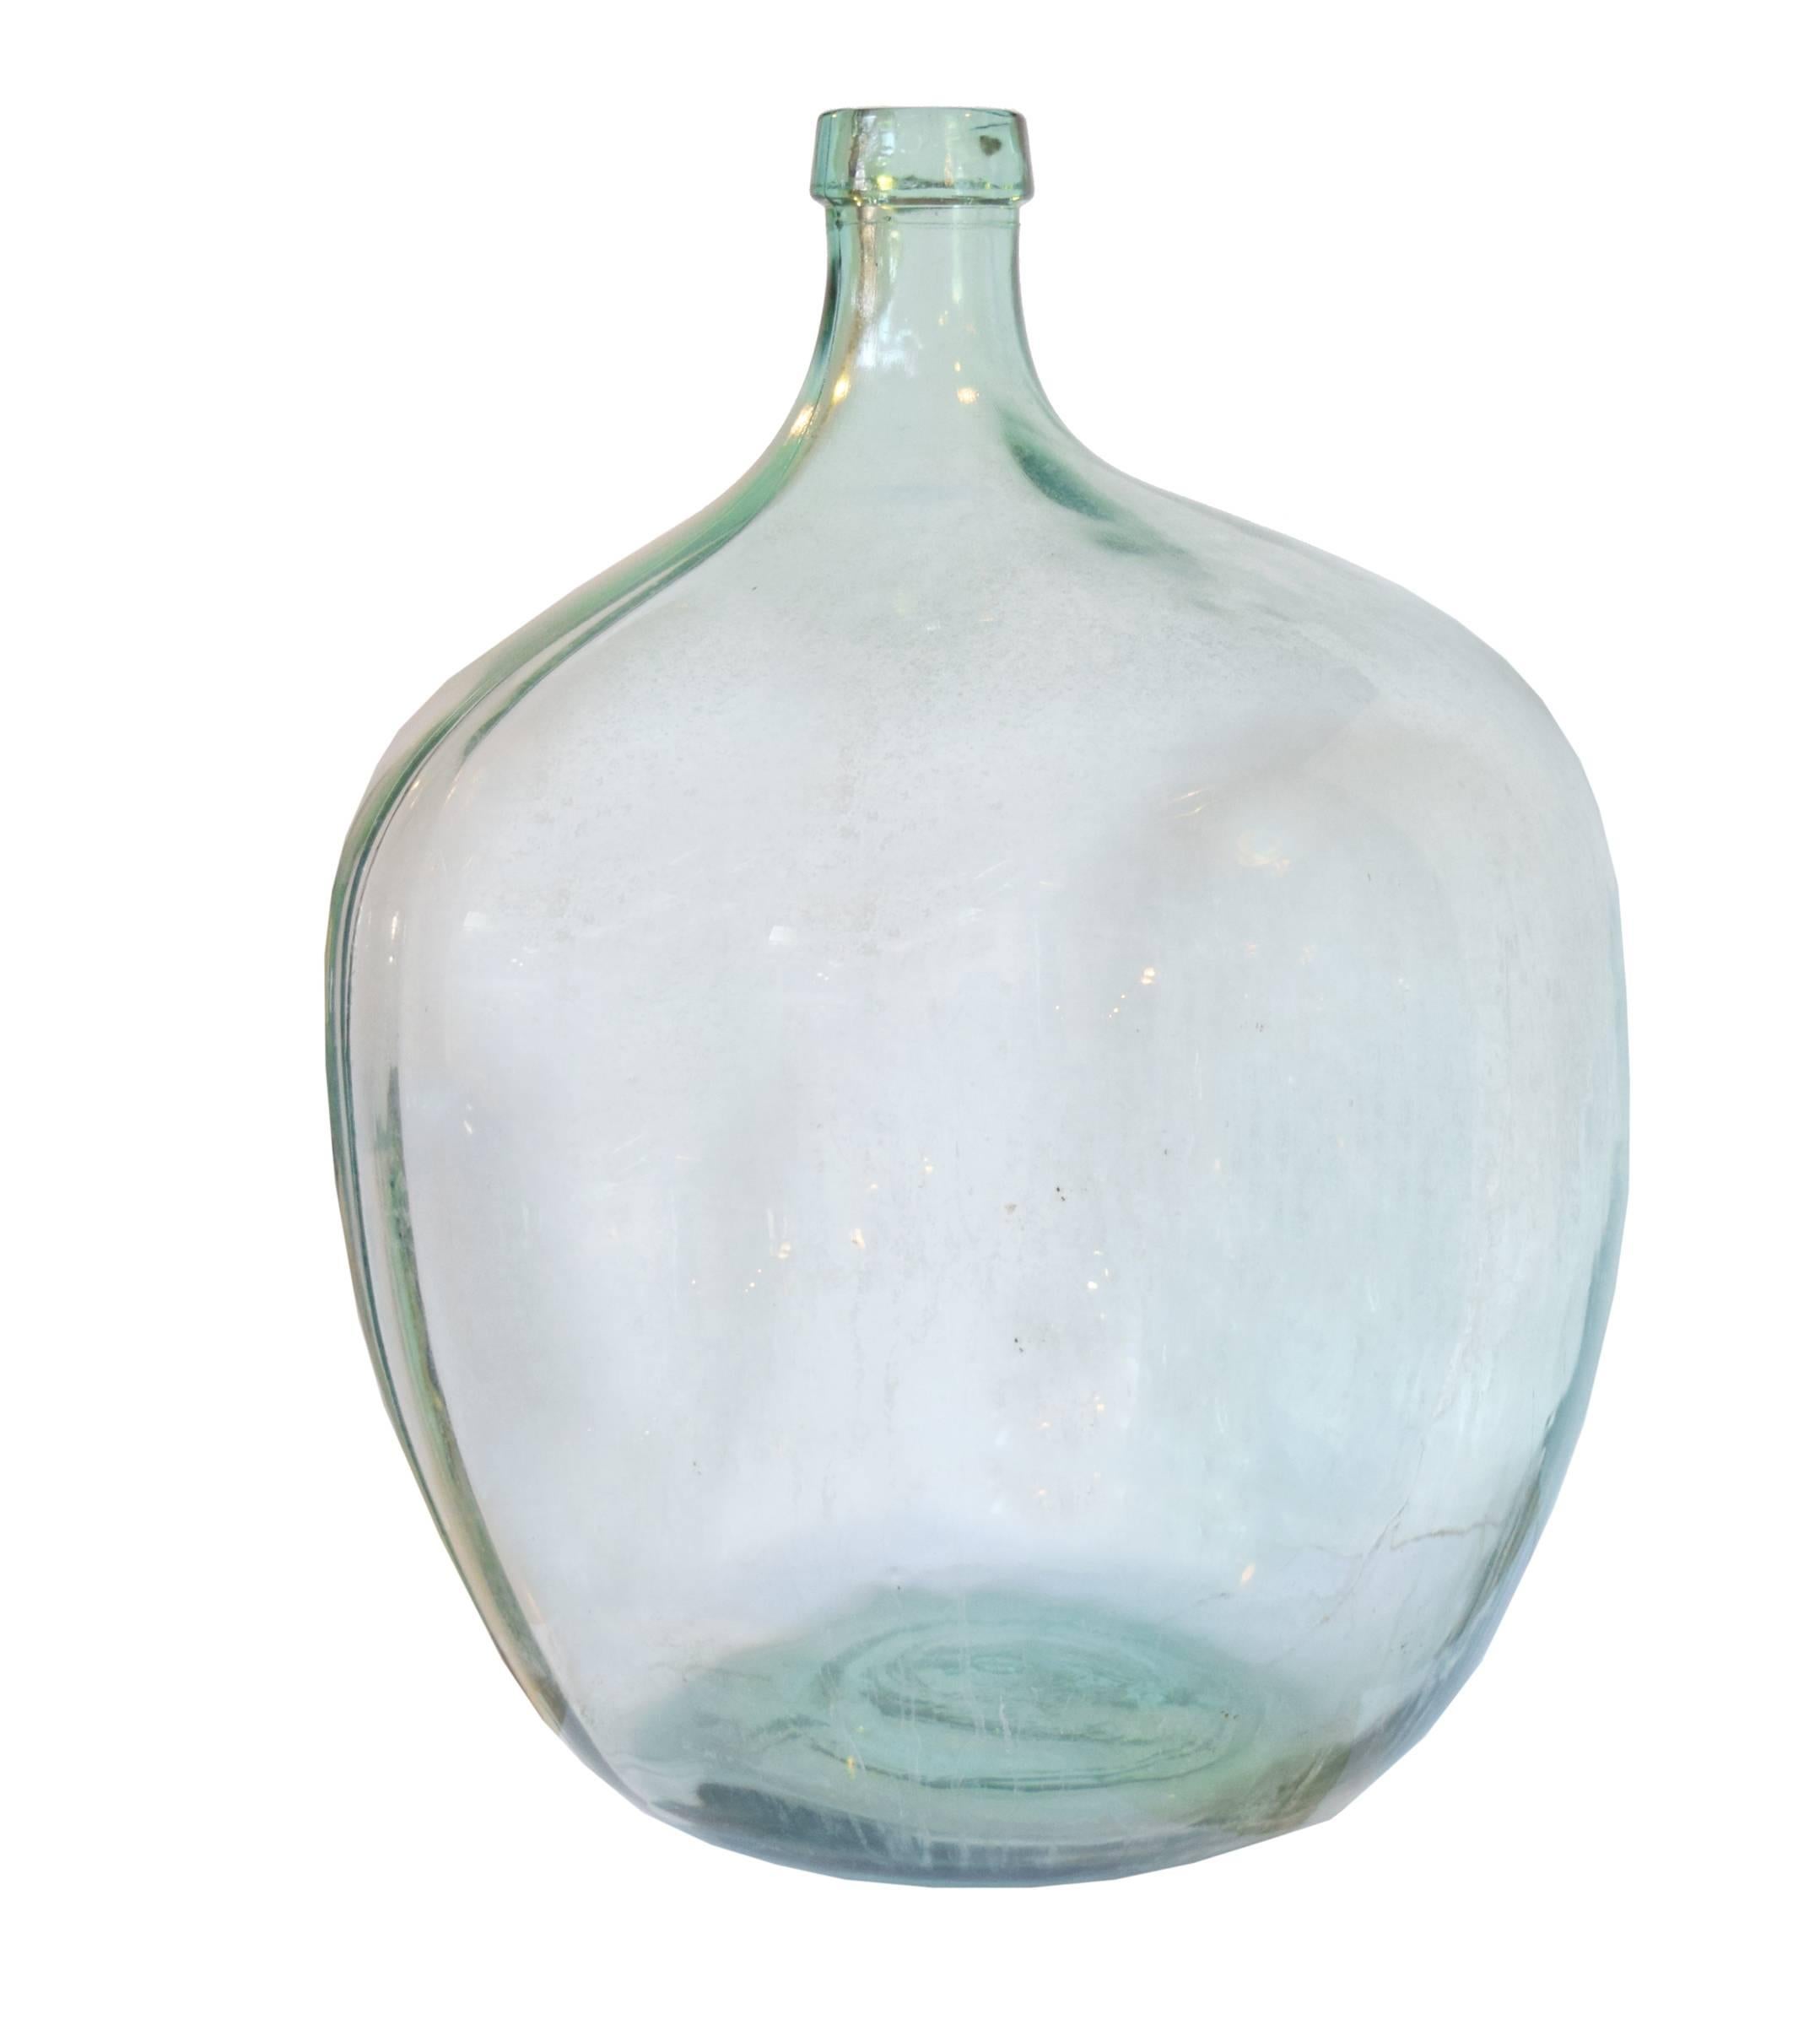 Handblown green glass wine vessel from the Czech Republic, early 20th century. Many available.
Dimensions very slightly, each unique.